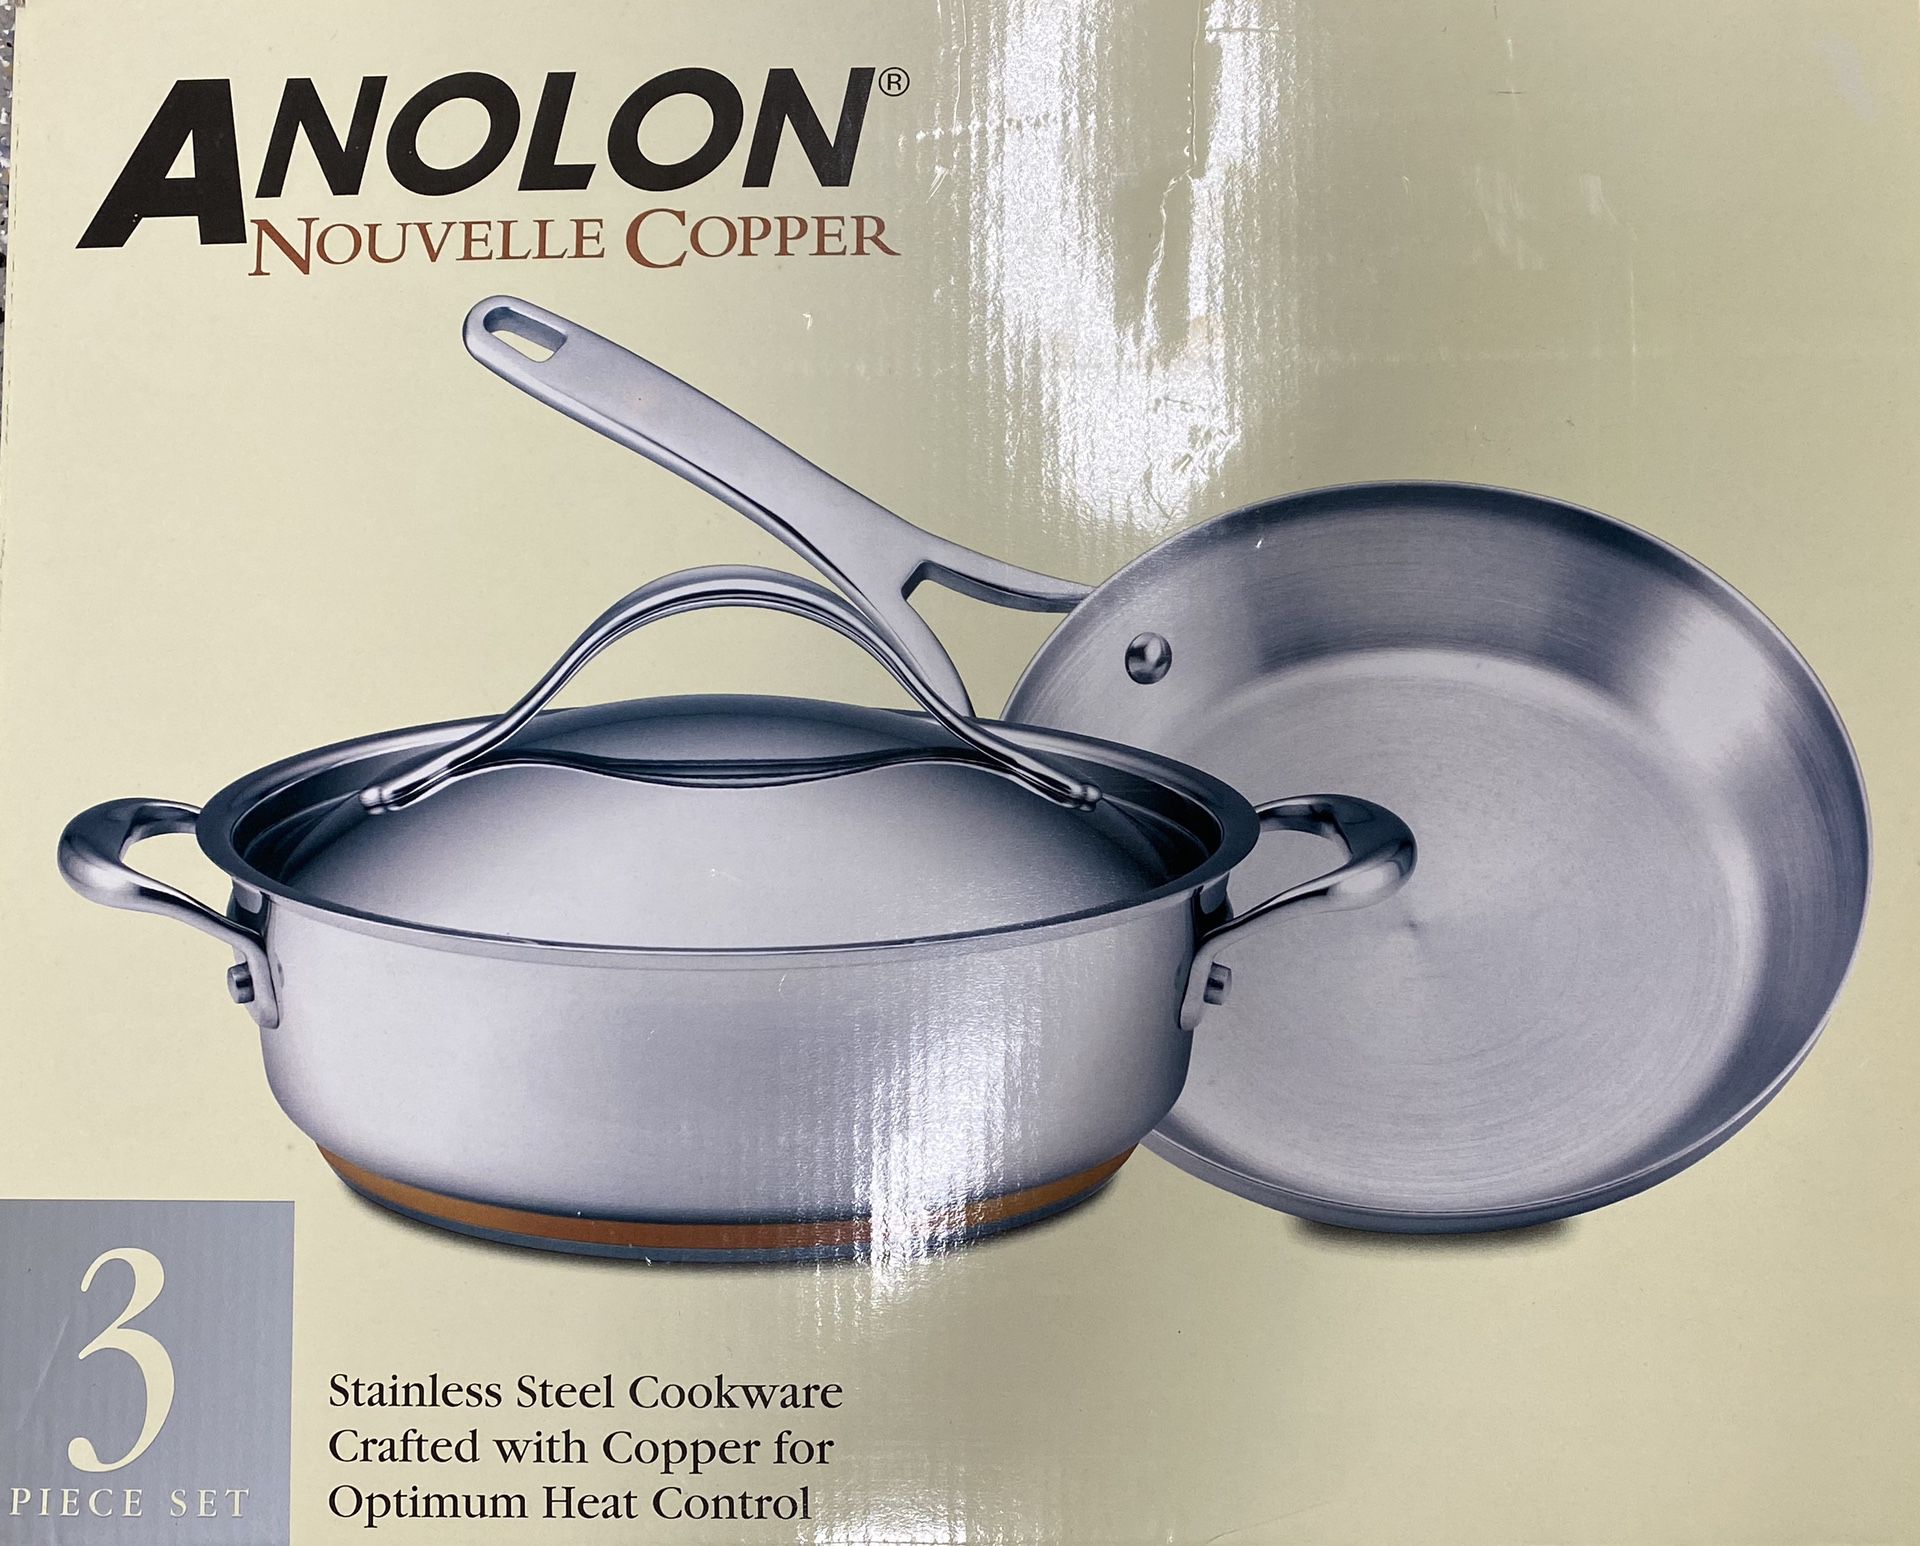 NEW Anolon Nouvelle Copper 3-Piece Stainless Steel Cookware Set